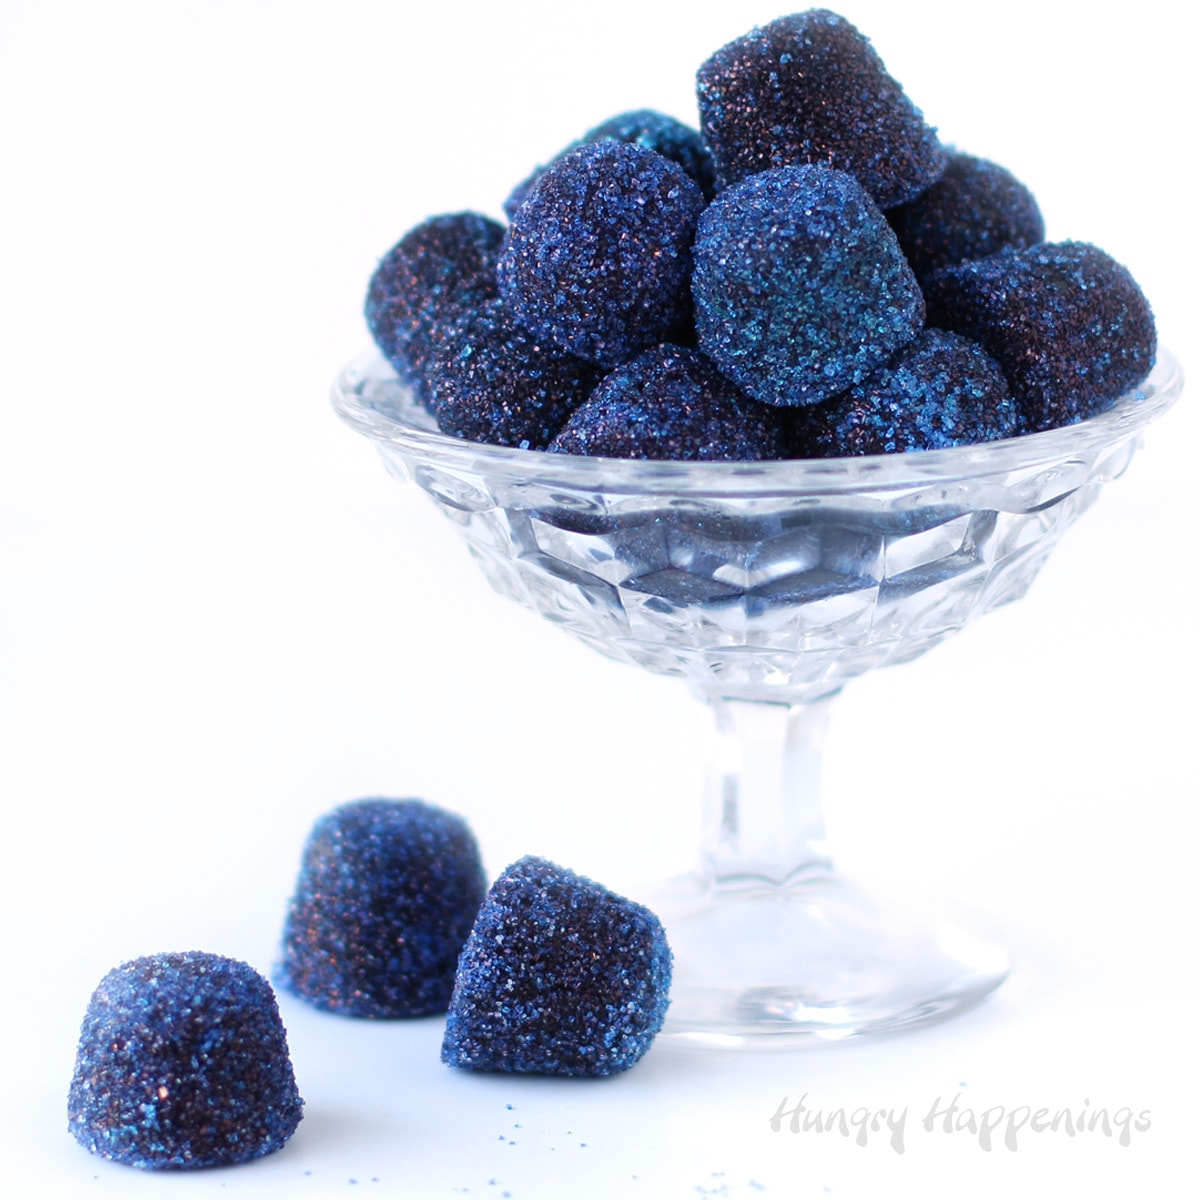 homemade blueberry gumdrops in a candy dish.